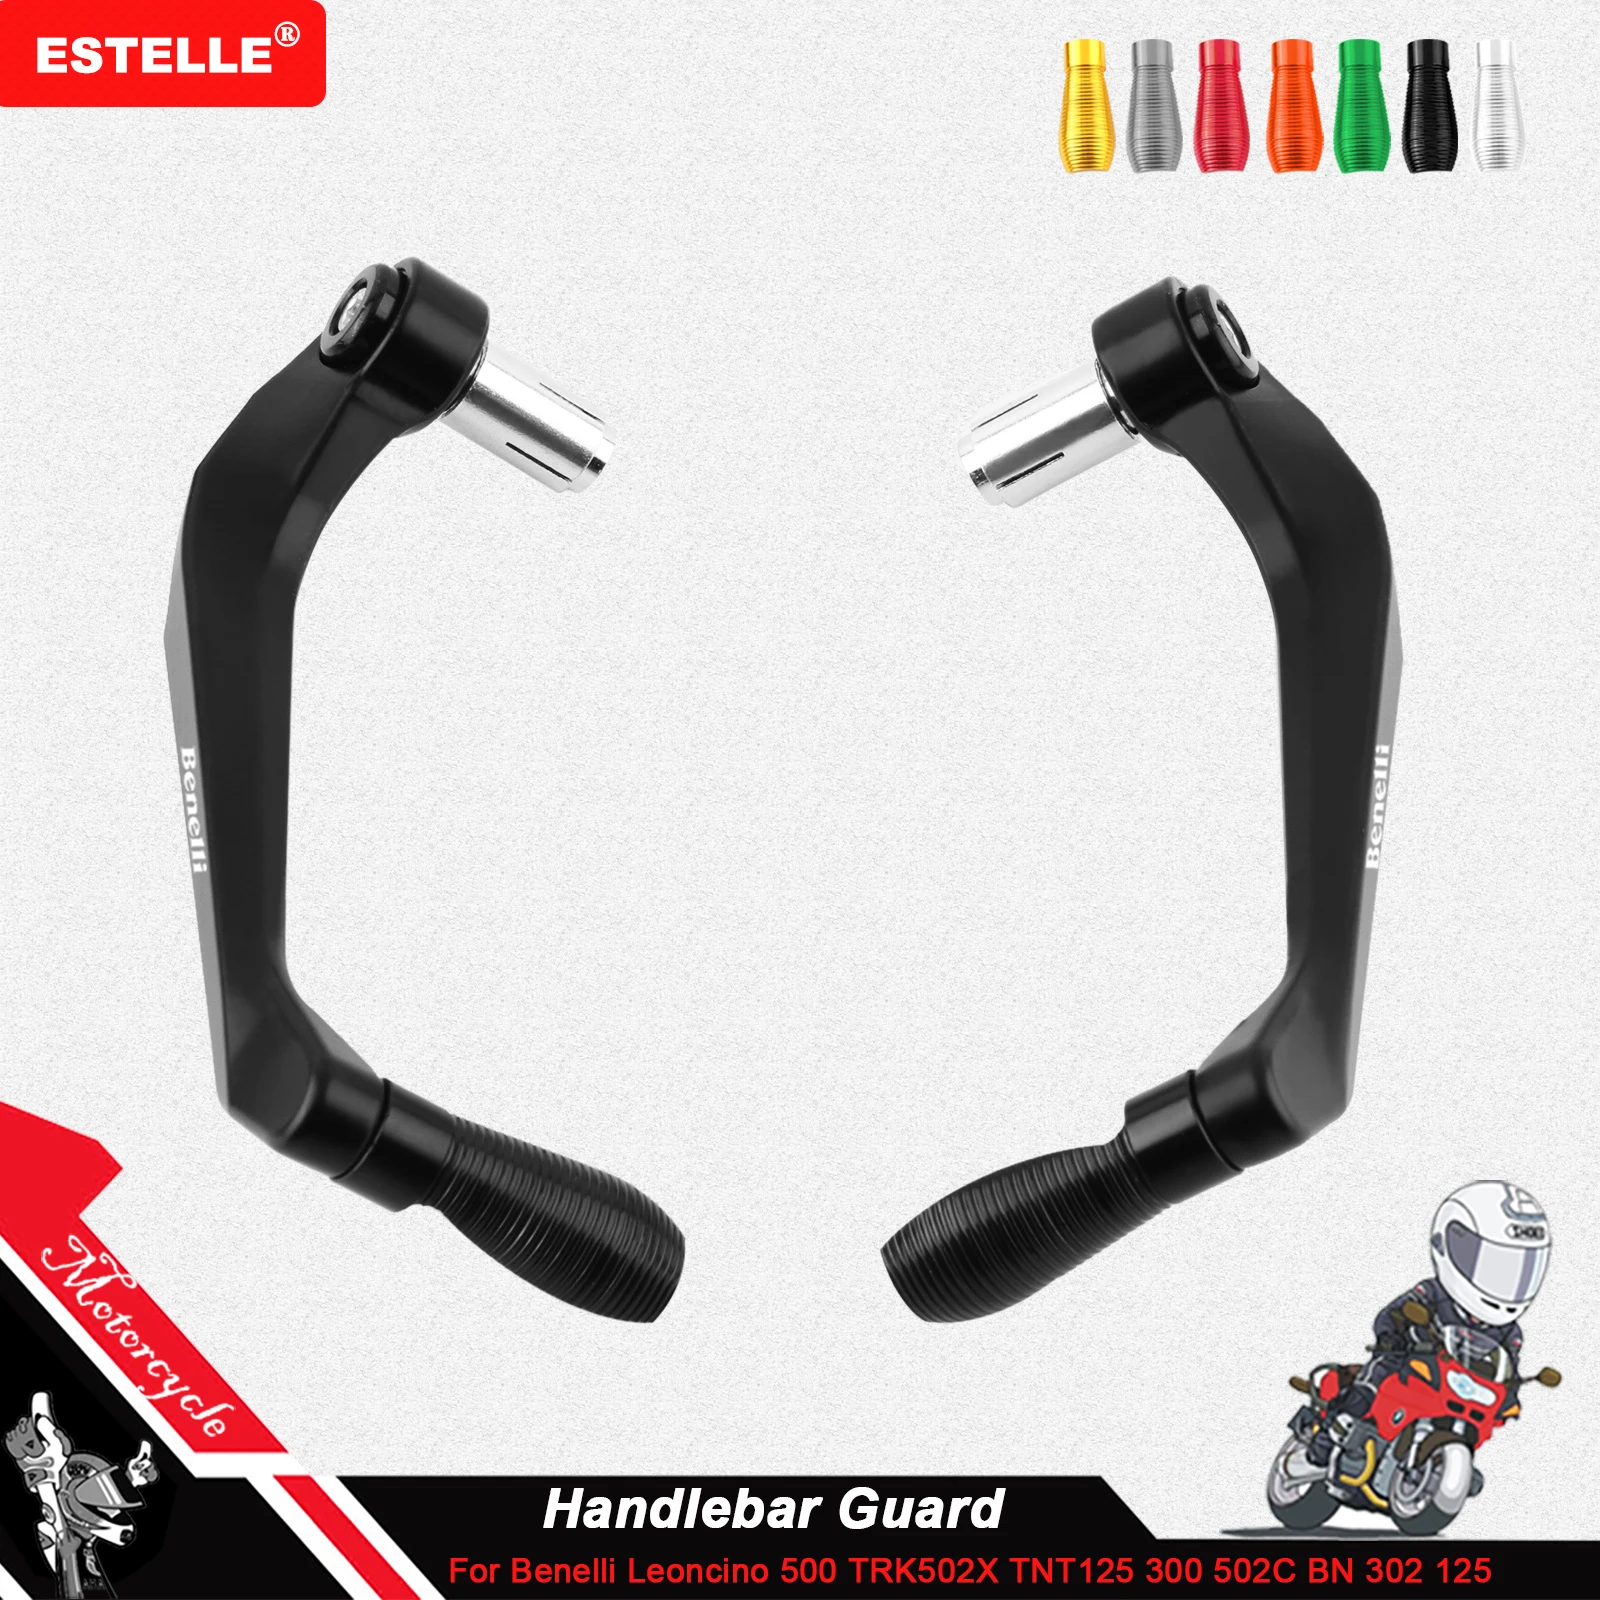 

For BENELLI TRK 502 TNT125 135 300 600 BN600 BN302 Motocycle Handlebar Handle grips Bar Ends Brake Clutch Levers Guard Protector